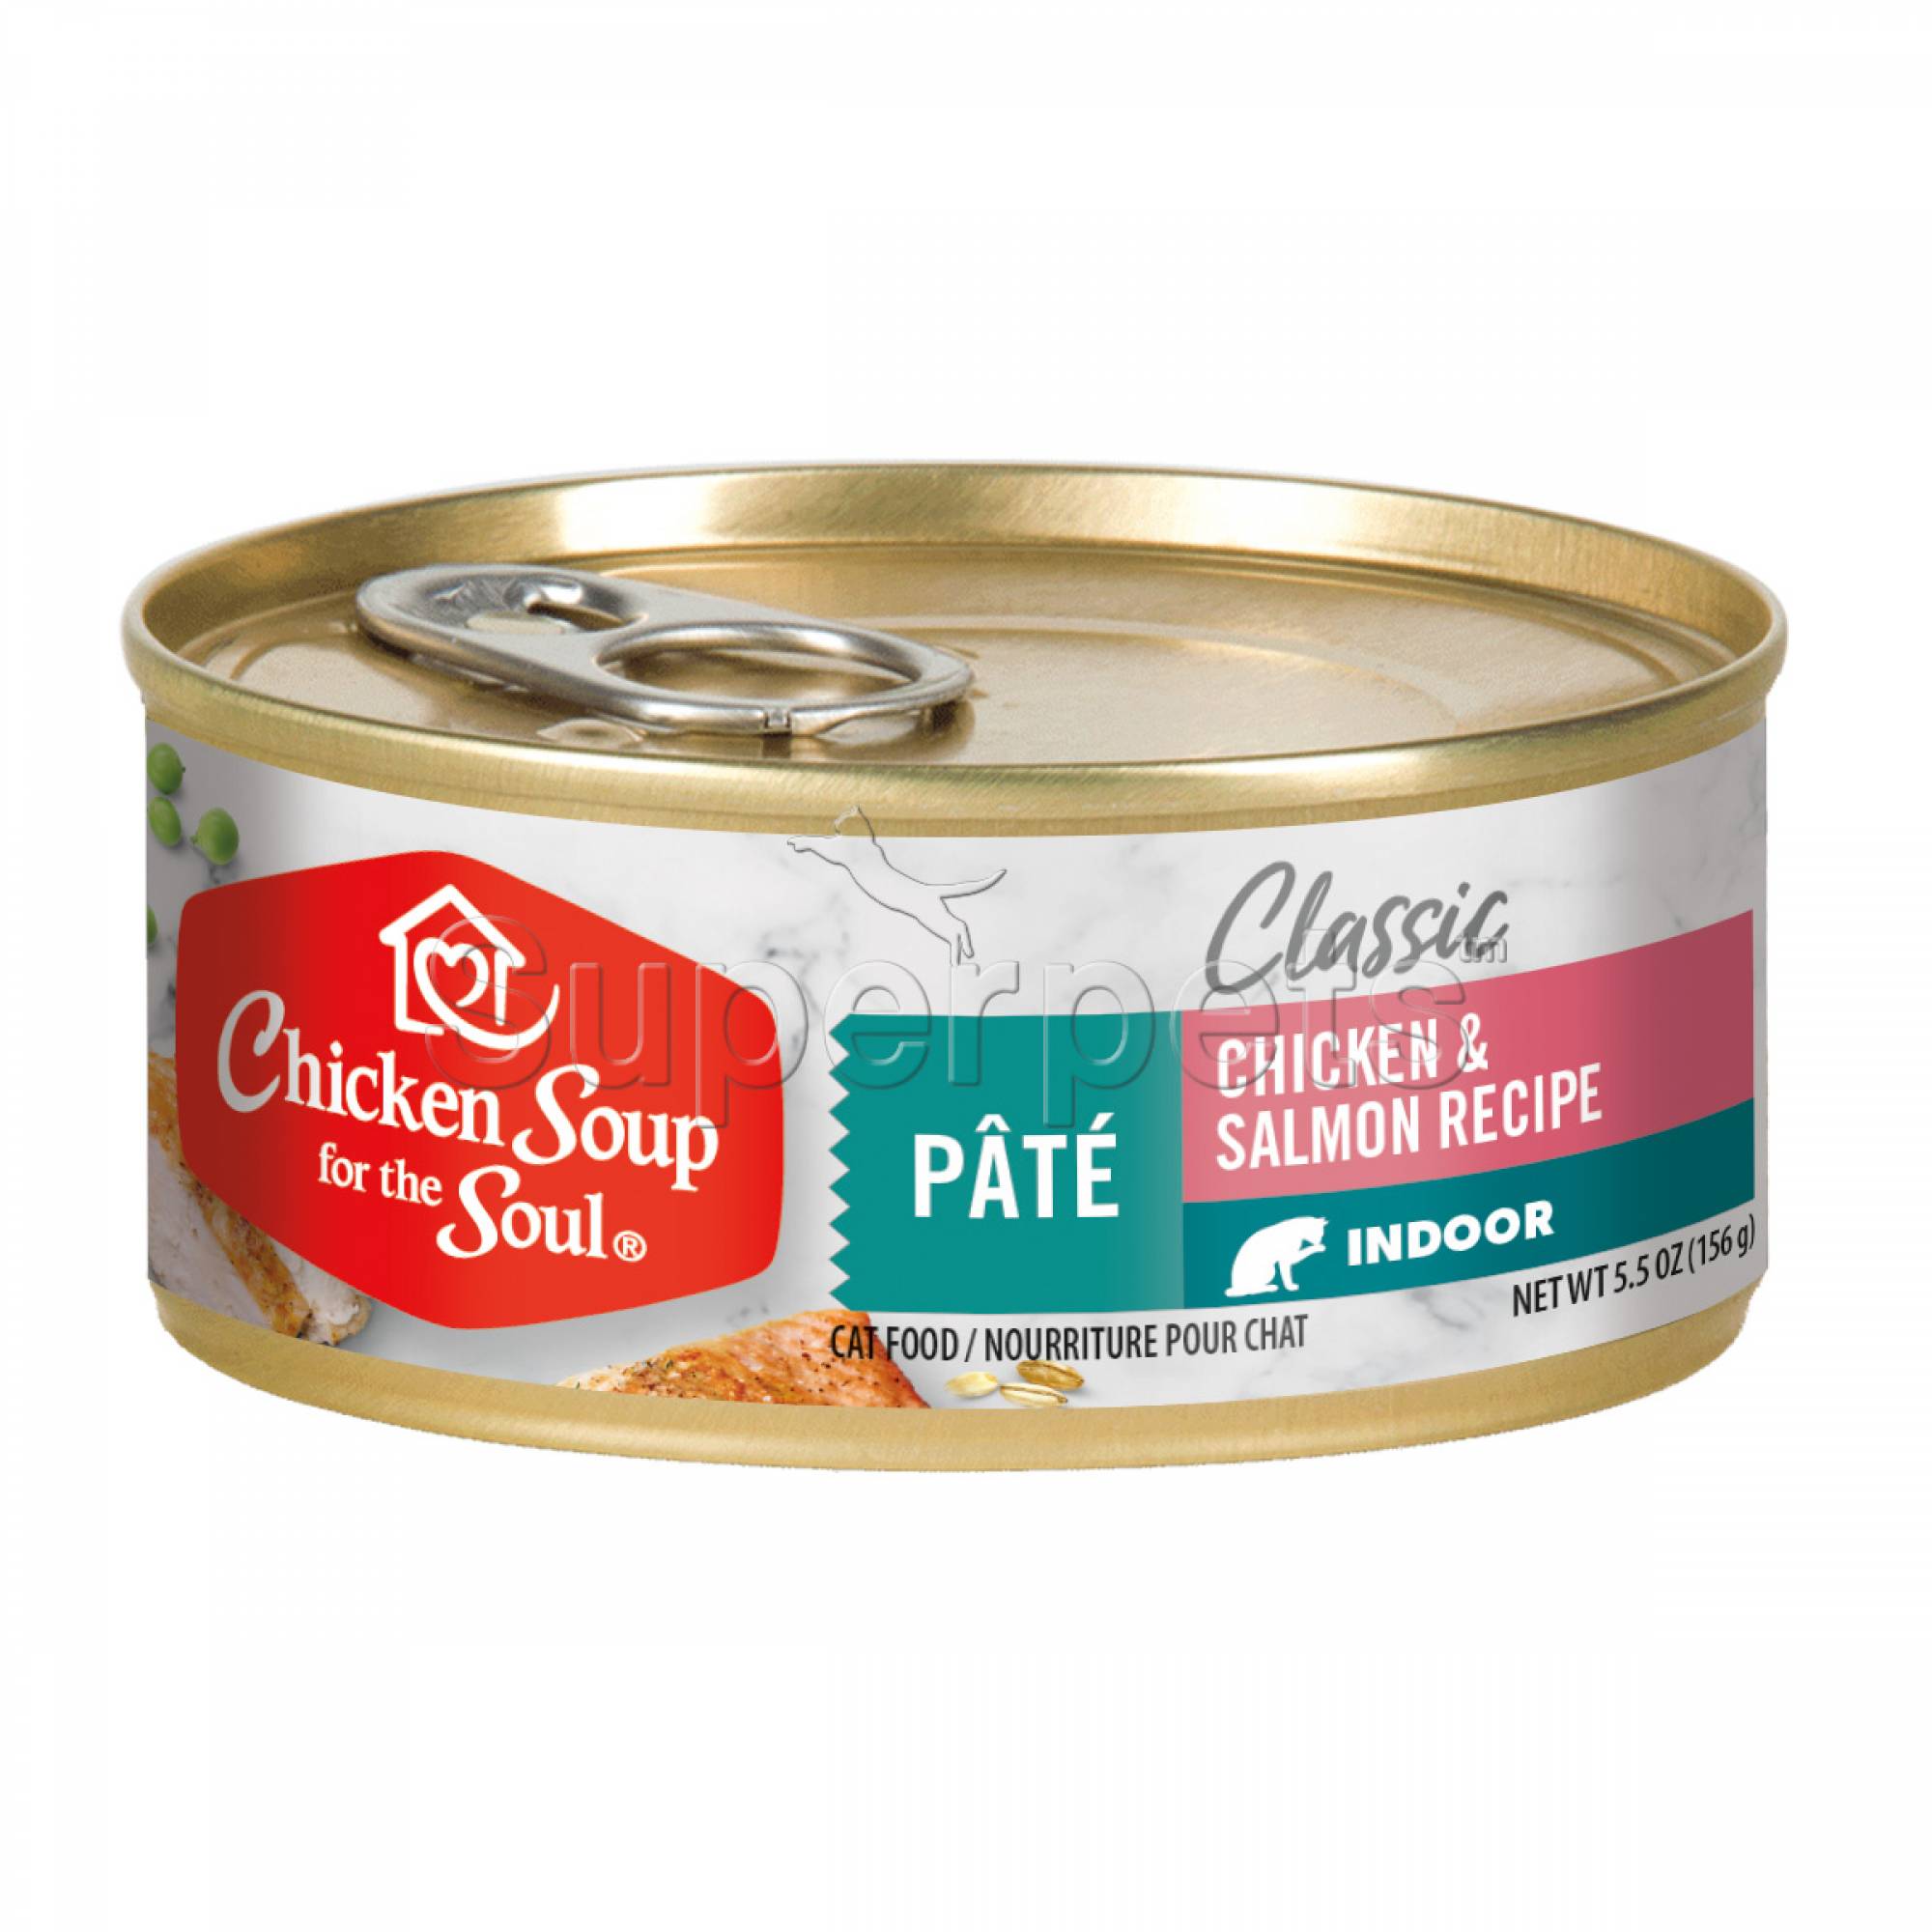 Chicken Soup for the Soul Cat Classic Pate 156g Indoor Chicken & Salmon Recipe